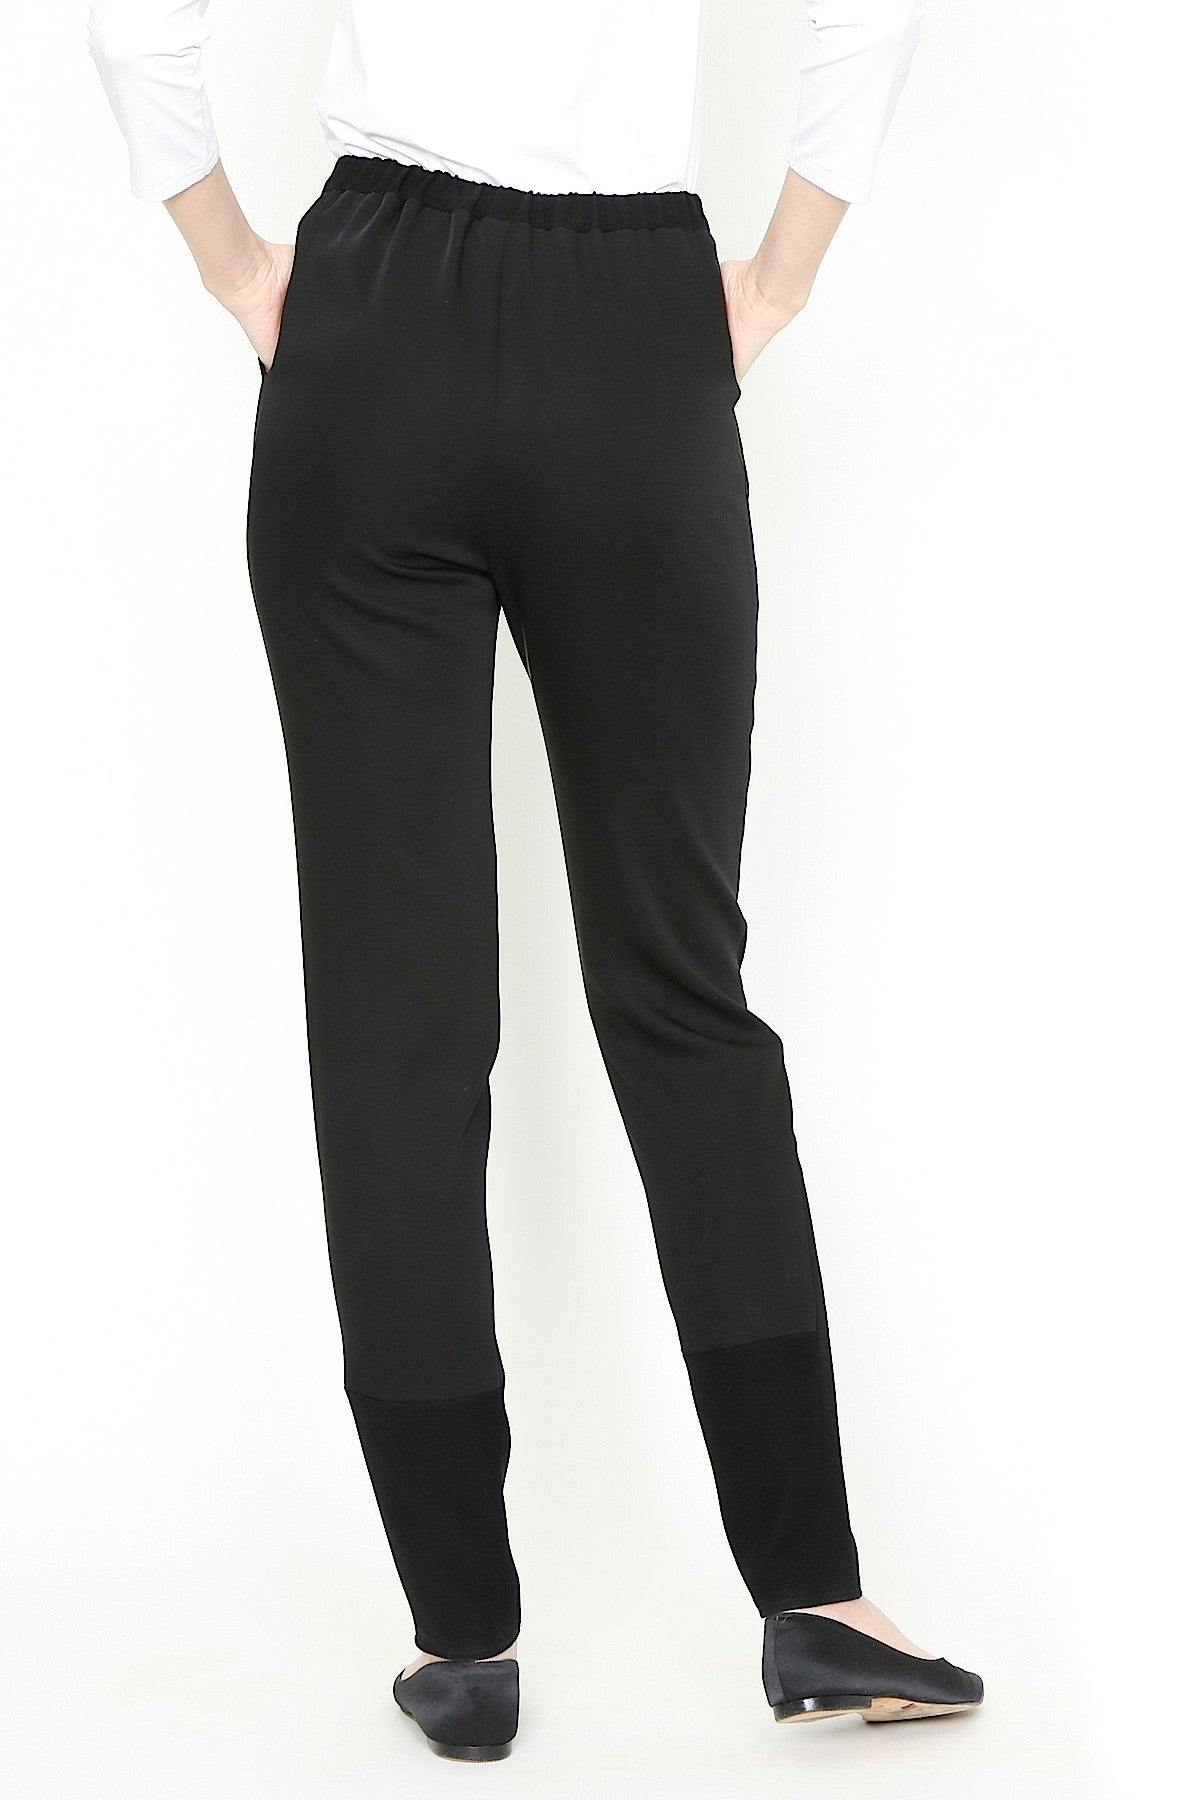 ANKLE RIB BLACK TRACK PANTS in black - Palm Angels® Official